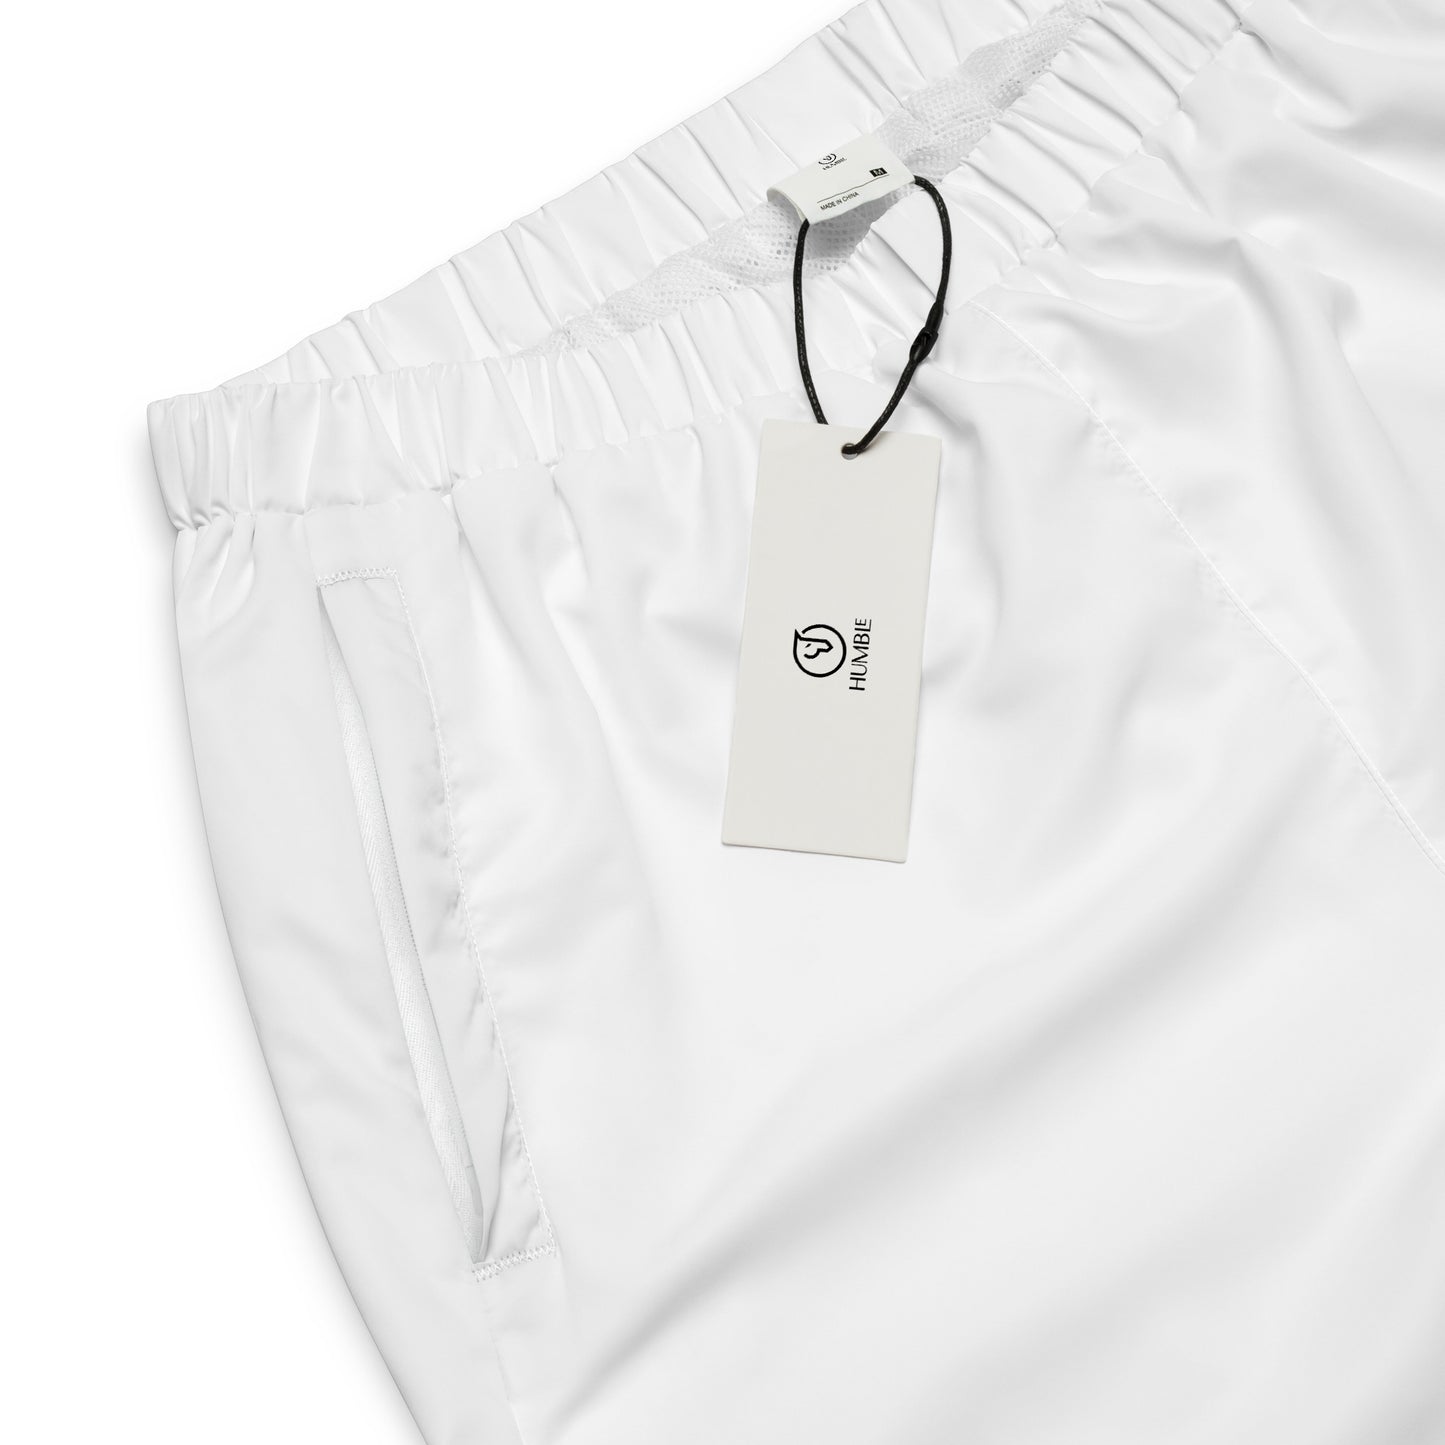 Humble Sportswear, men's white relaxed fit track pants 